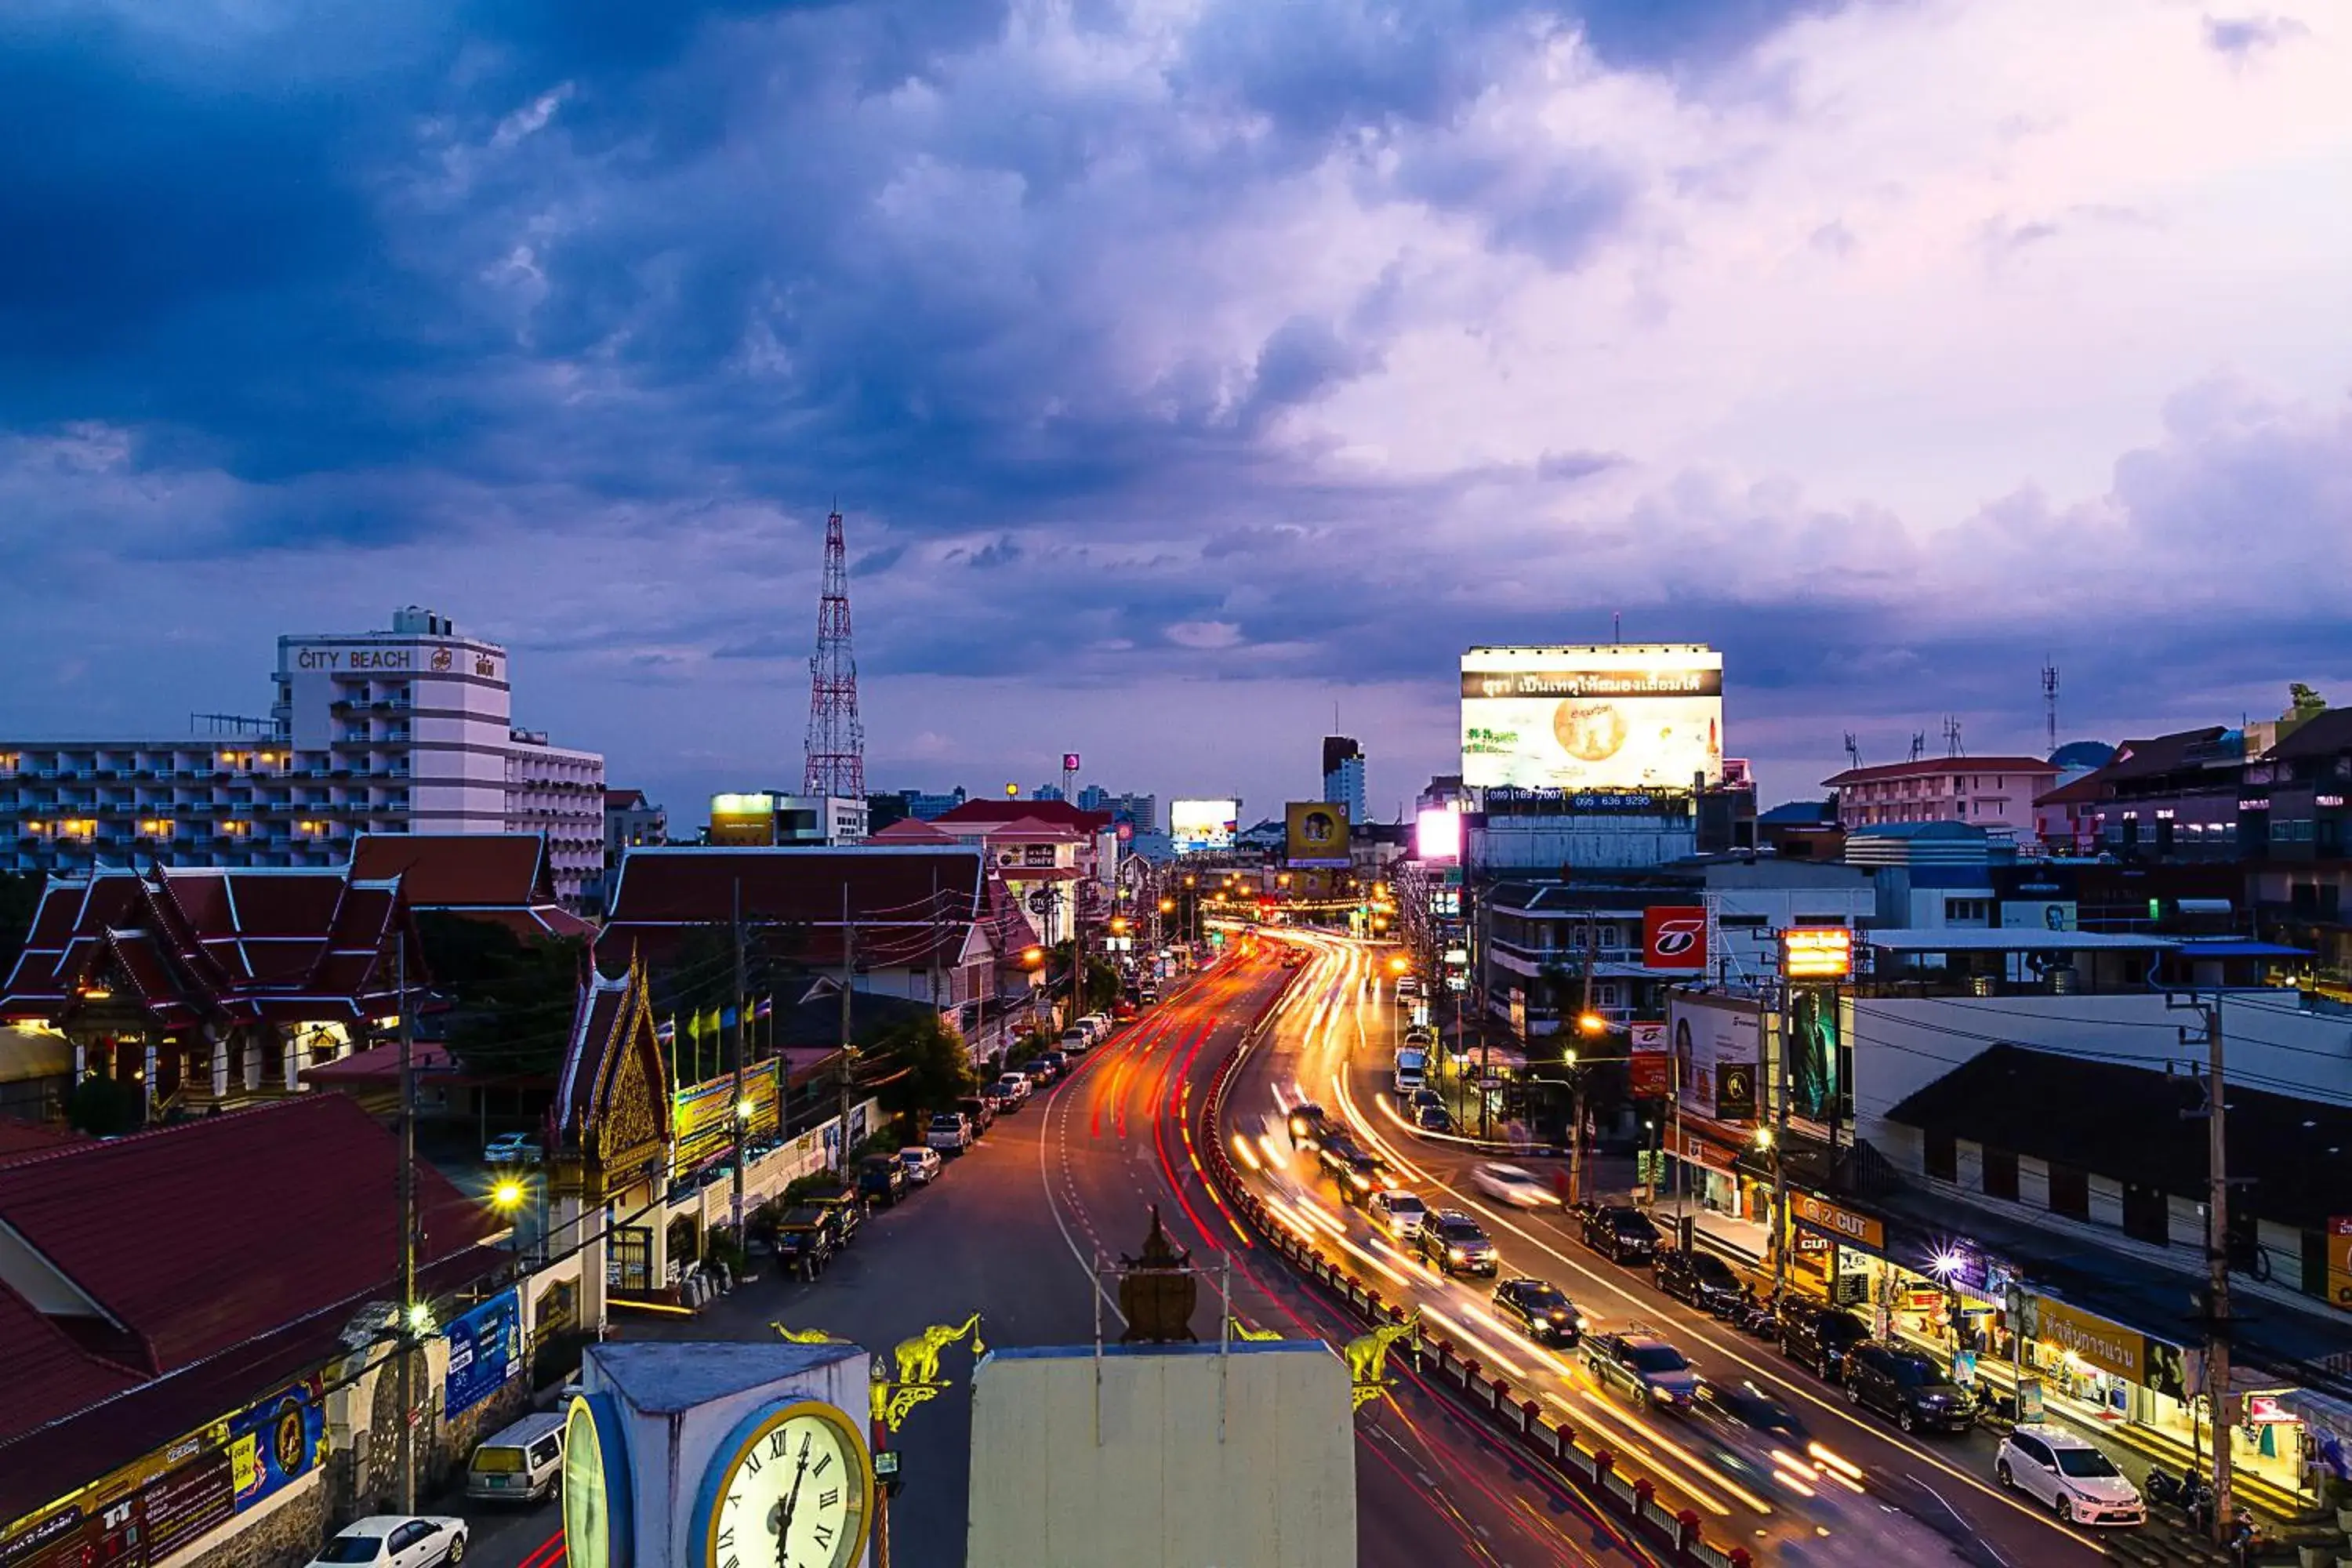 City view in The Moon Hostel Huahin